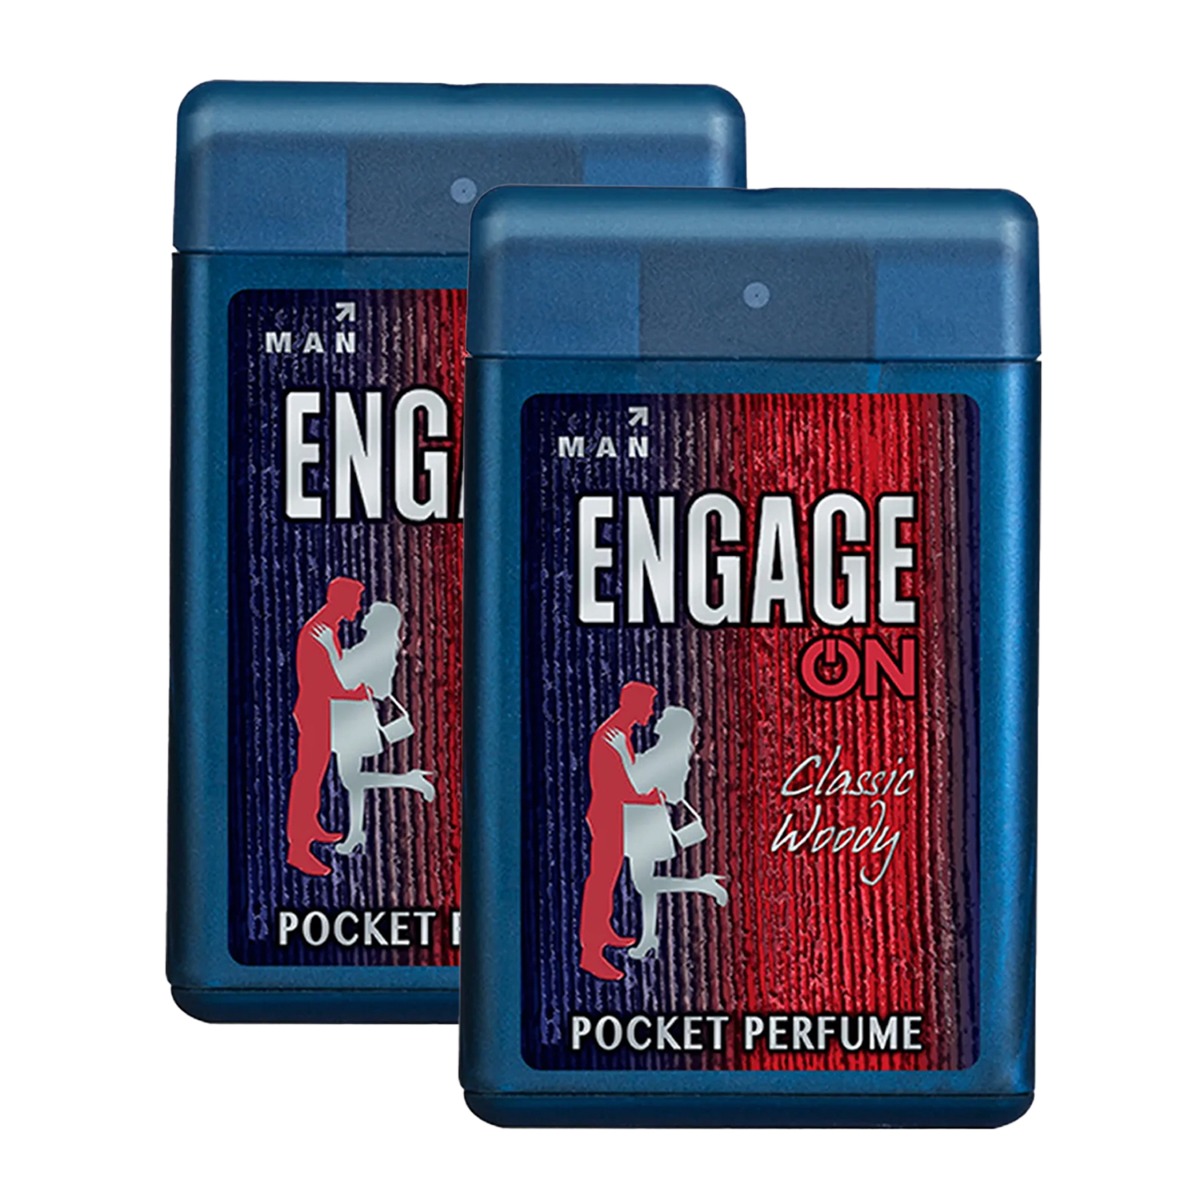 Engage ON Man Classic Woody Assorted - Pack of 2, 17ml Each